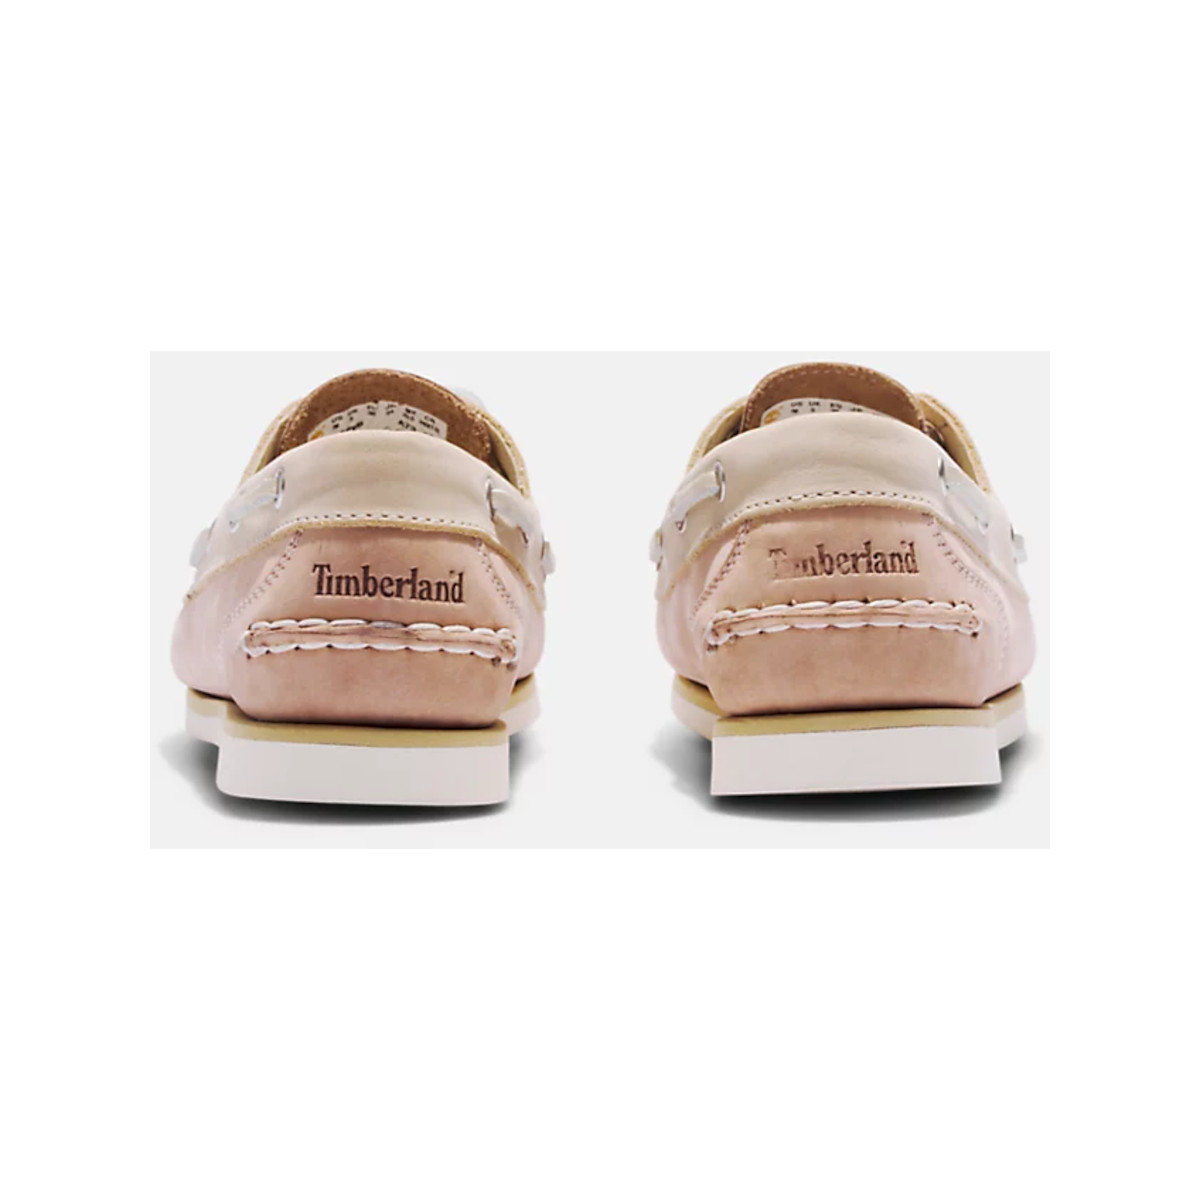 Timberland Classic Boat chaussure bateau femme - beige clair, pointure 40